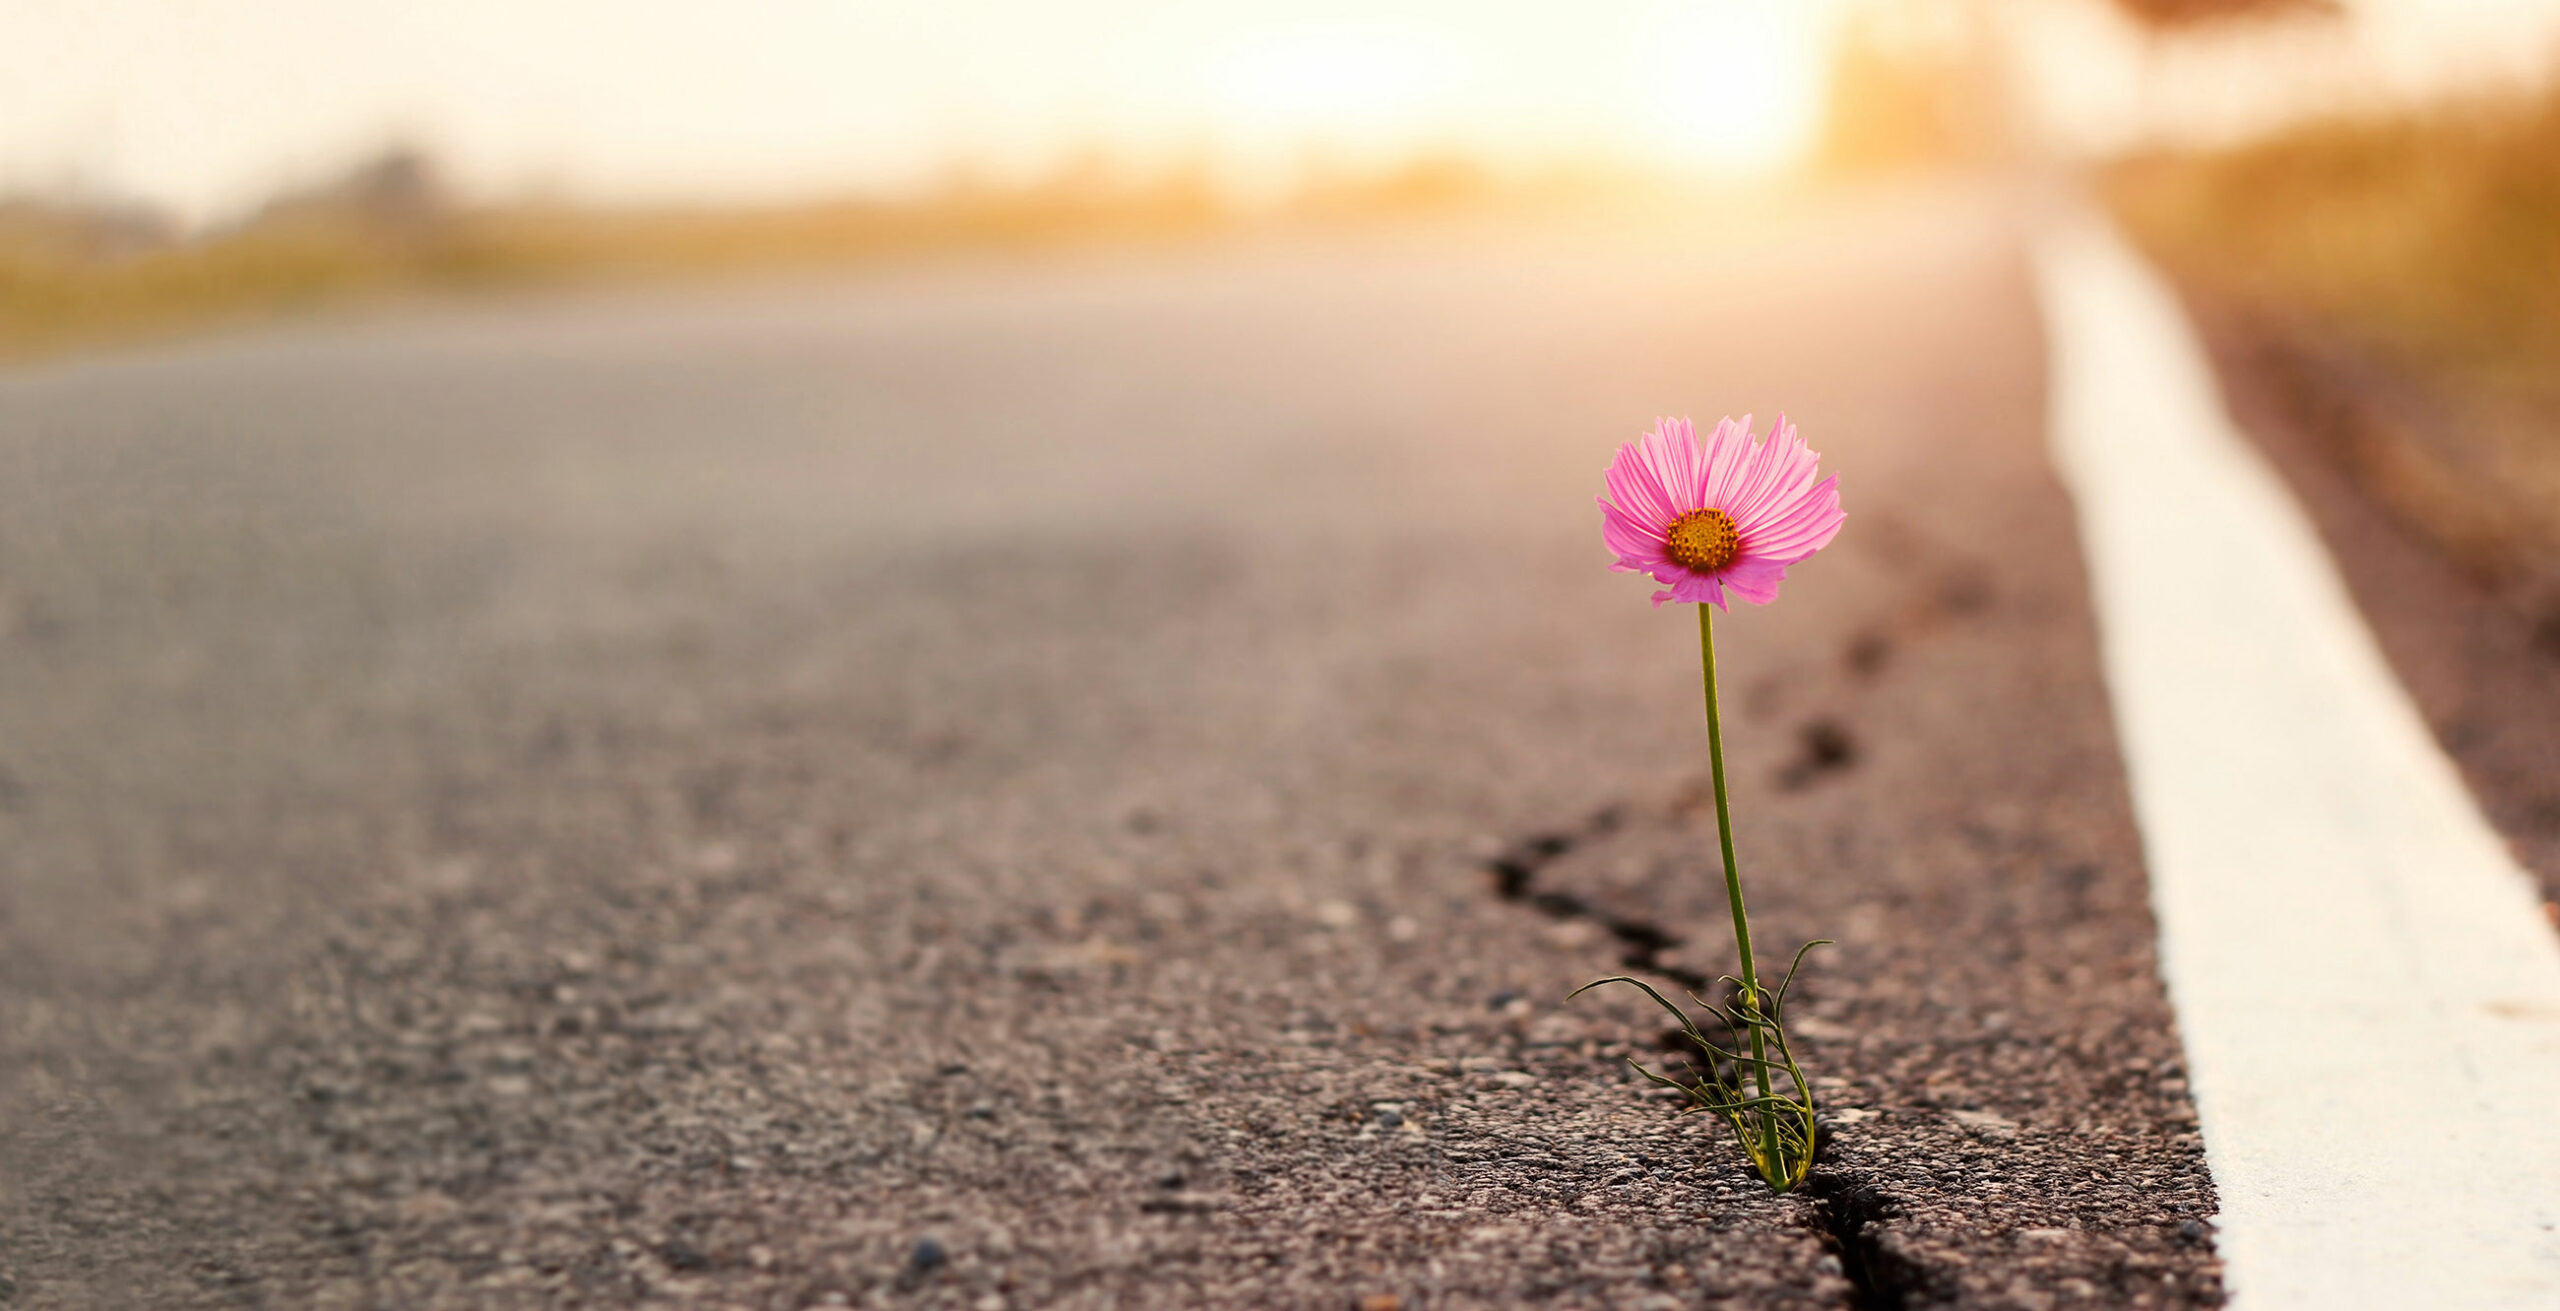 a flower growing out of a crack in pavement